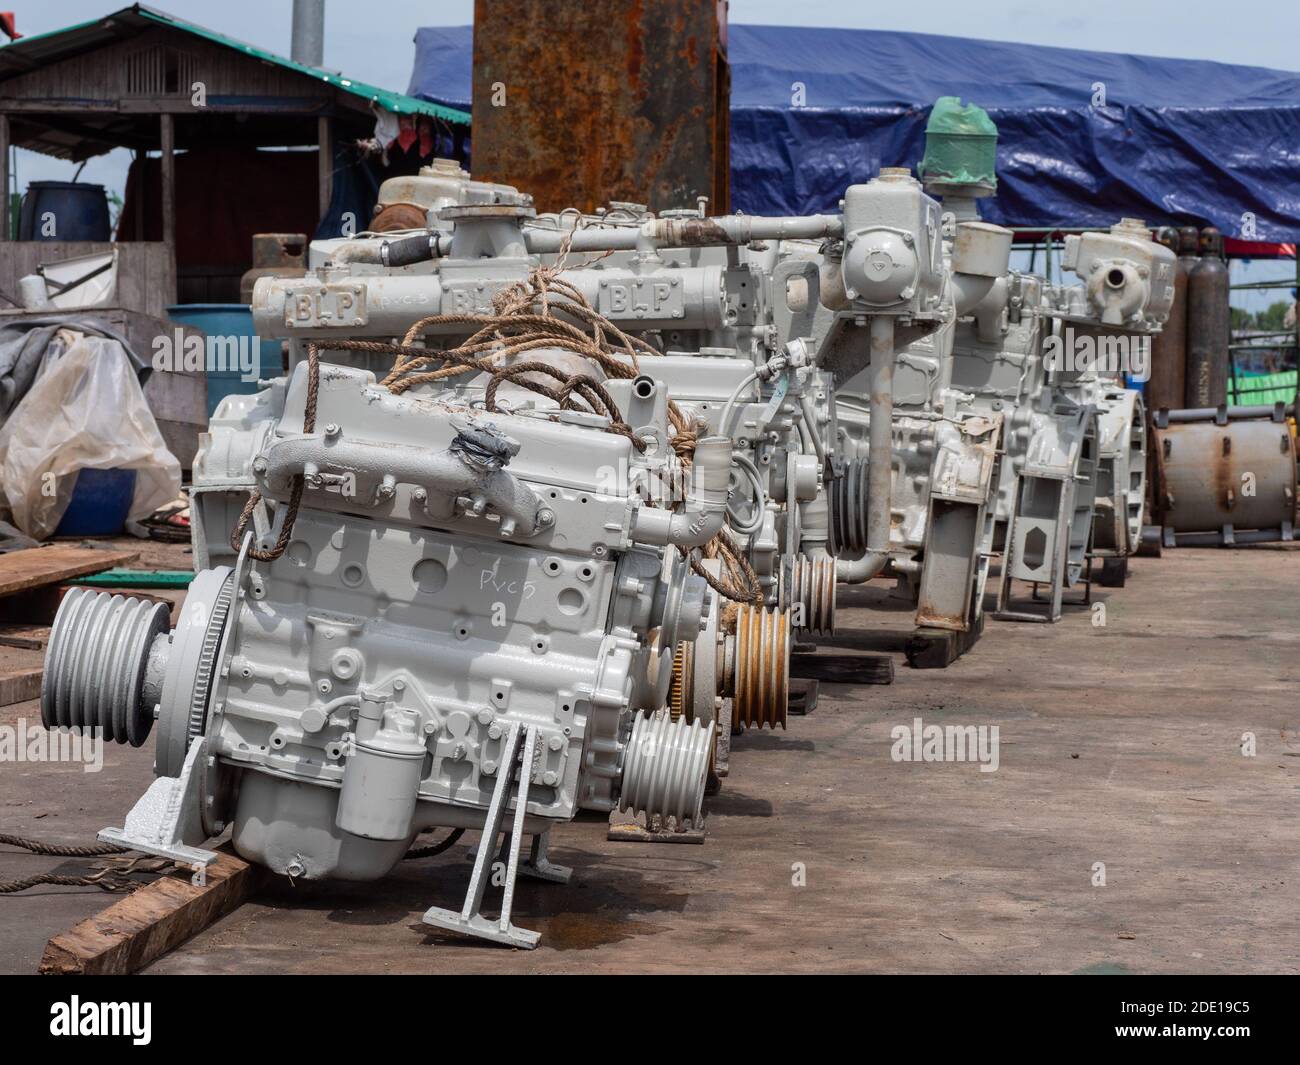 Old, used marine diesel engines at a quay in Myeik, Tanintharyi Region, Myanmar Stock Photo